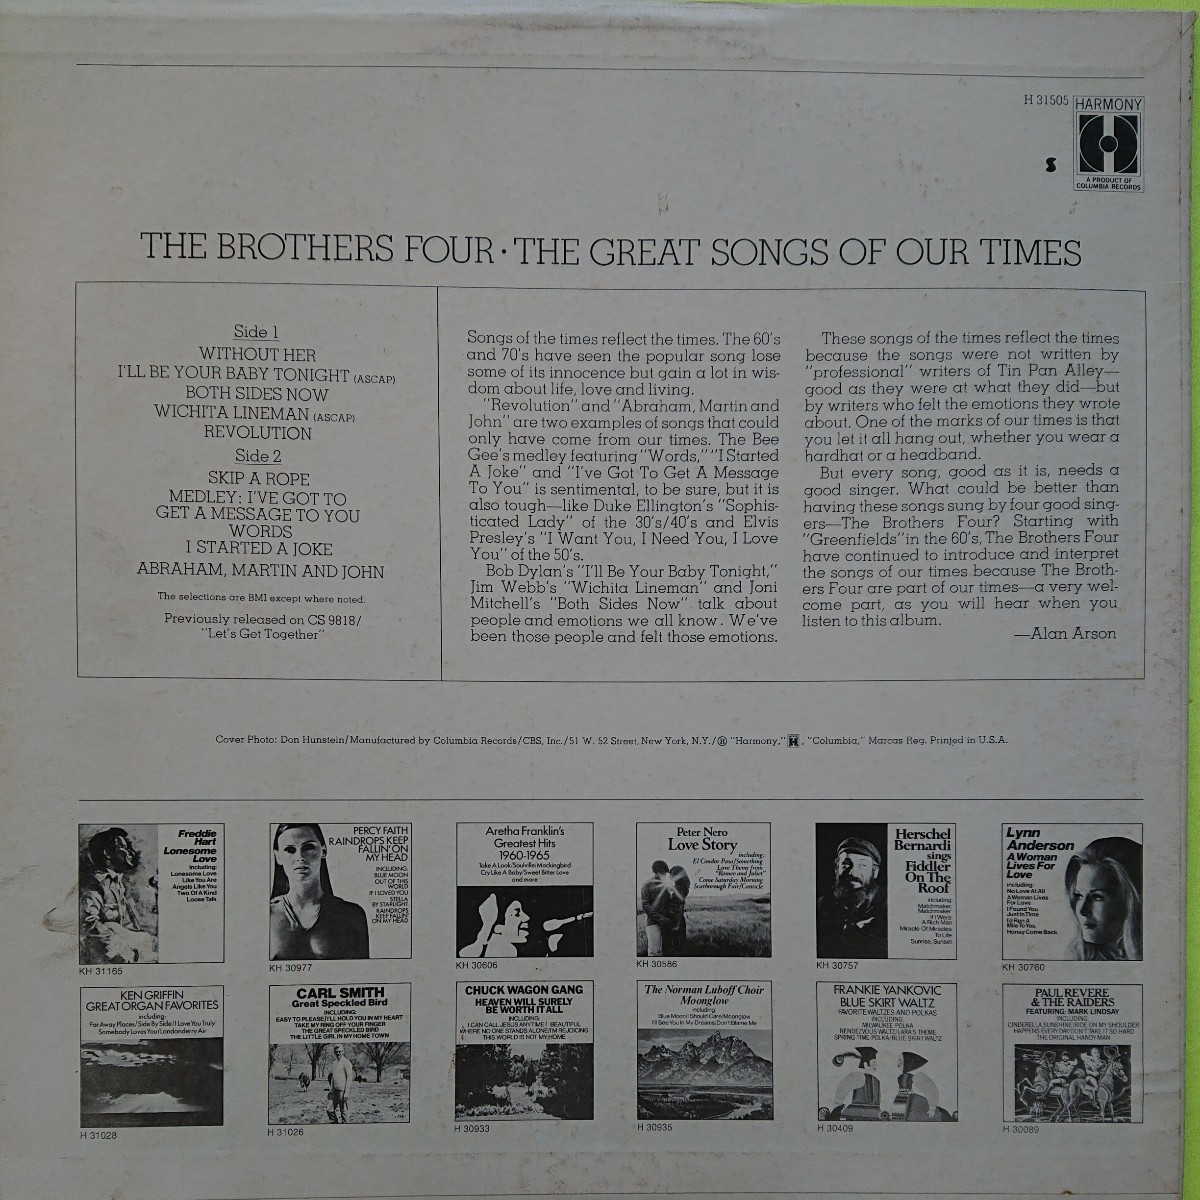 LP(輸入盤)/BROTHERS FOUR〈GREAT SONGS OF OUR TIMES〉☆5点以上まとめて（送料0円）無料☆_画像2